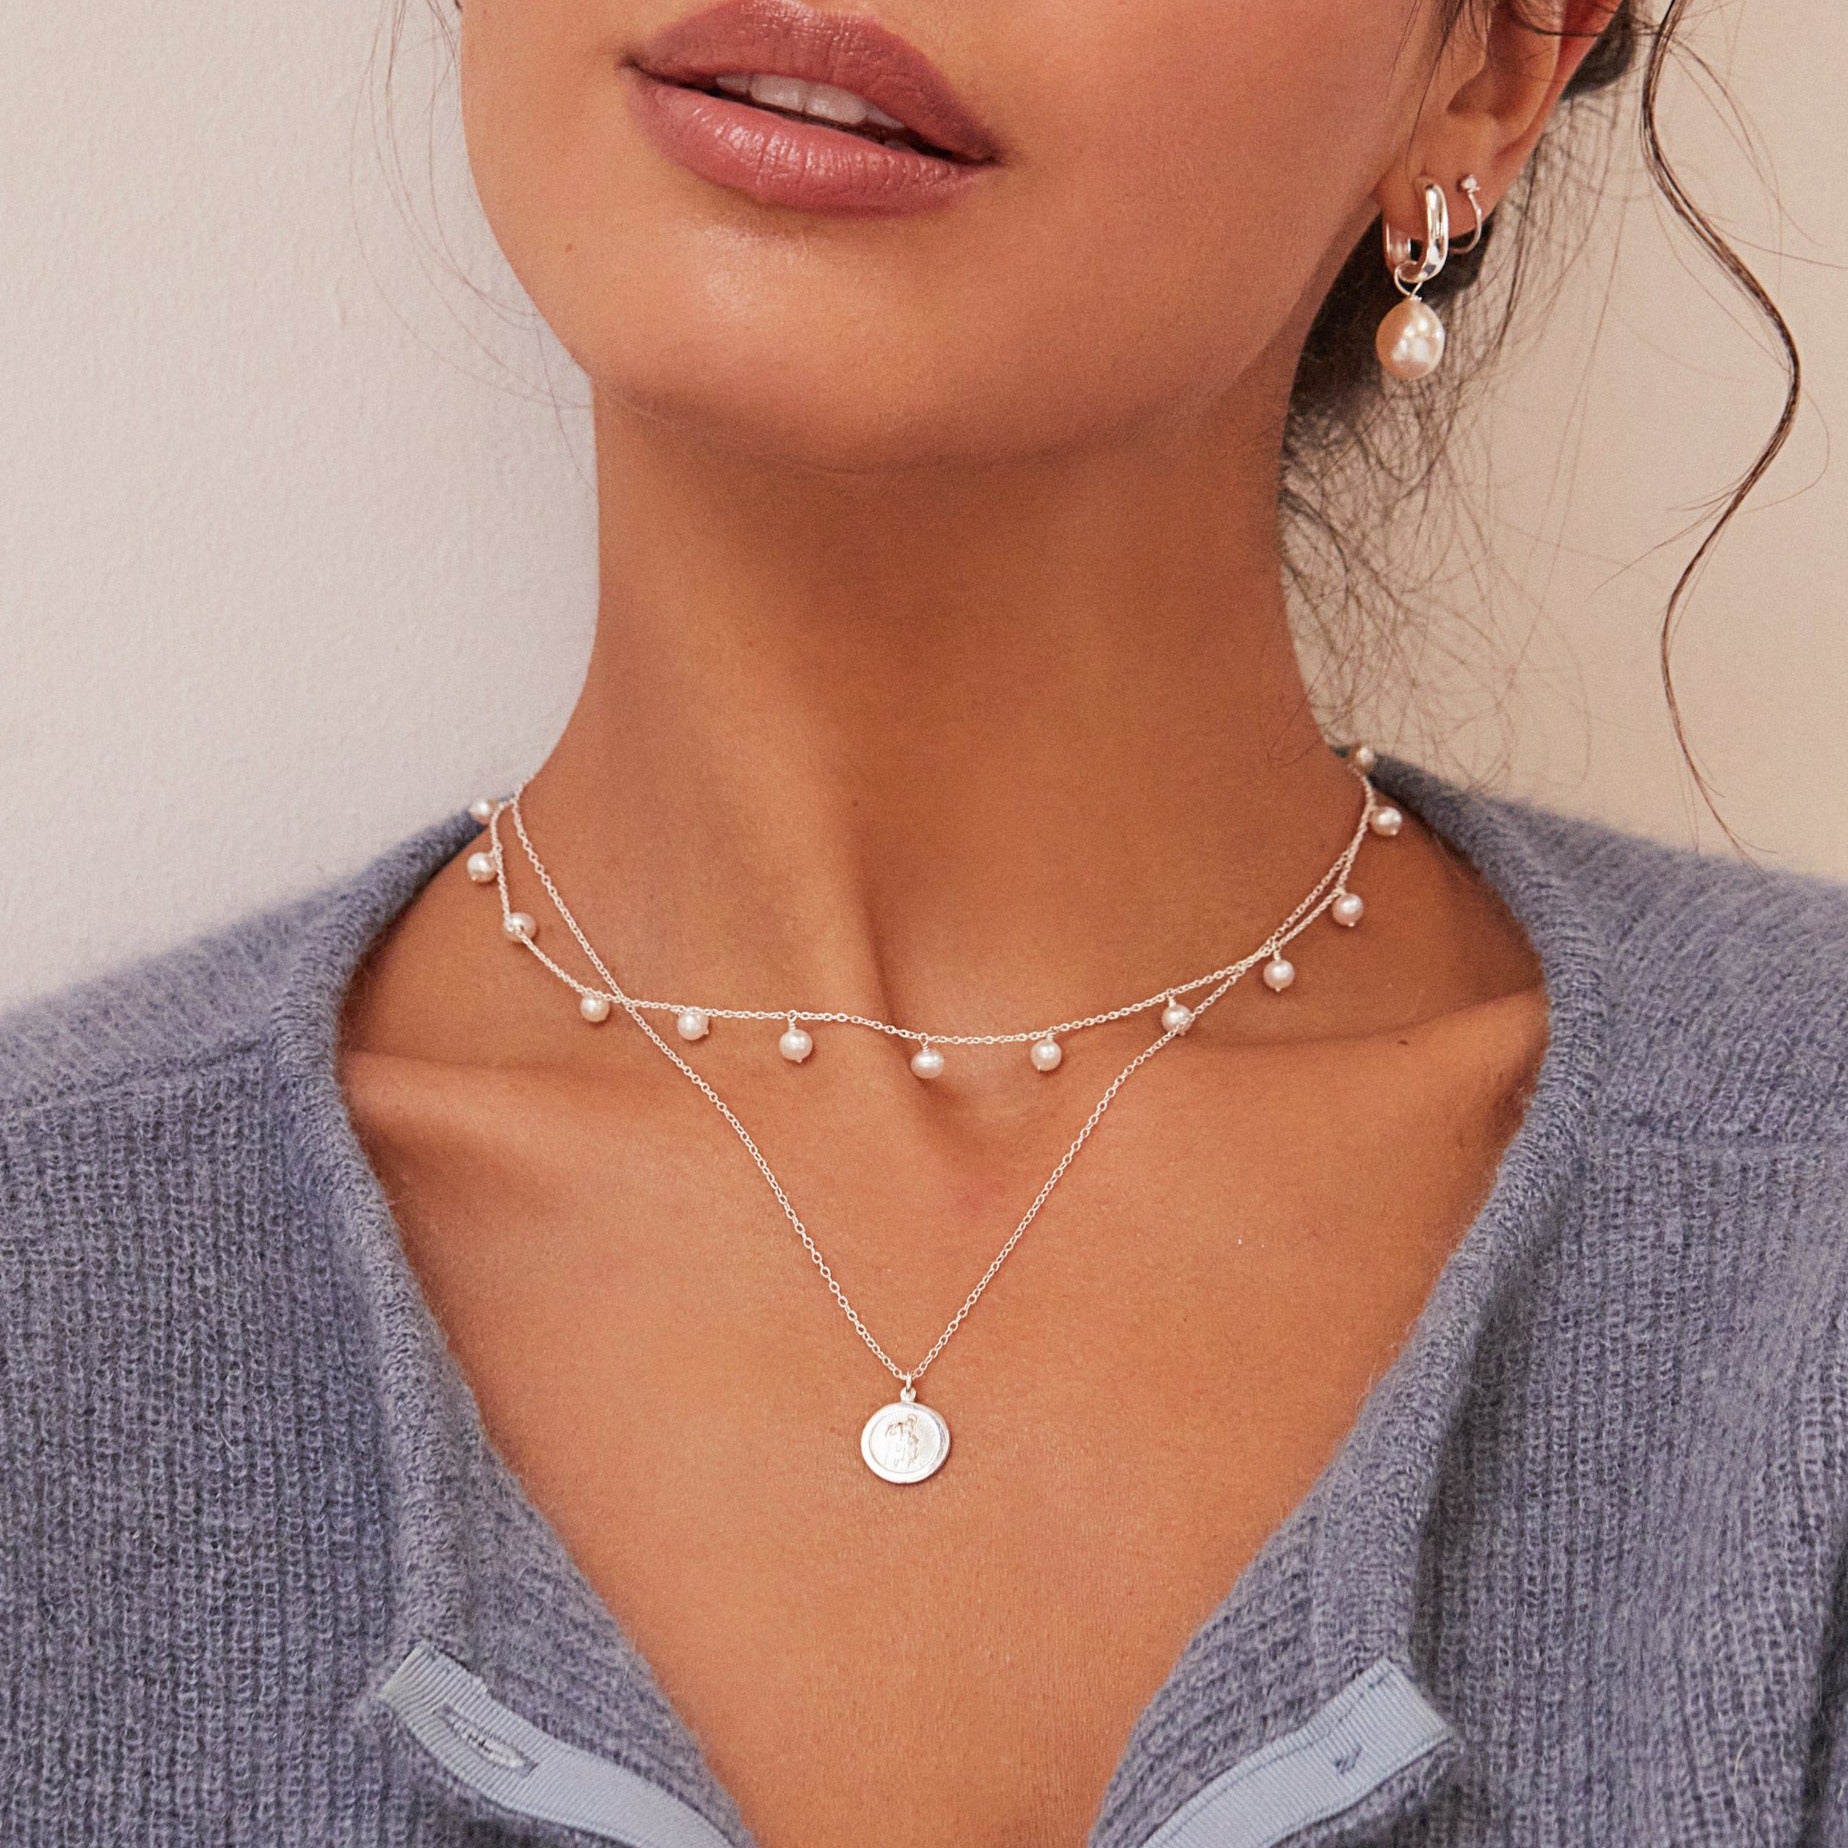 Silver small round St Christopher medallion necklace layered with a silver pearl drop choker around the neck of a woman wearing a silver square edge pearl drop hoop earring in her ear lobe